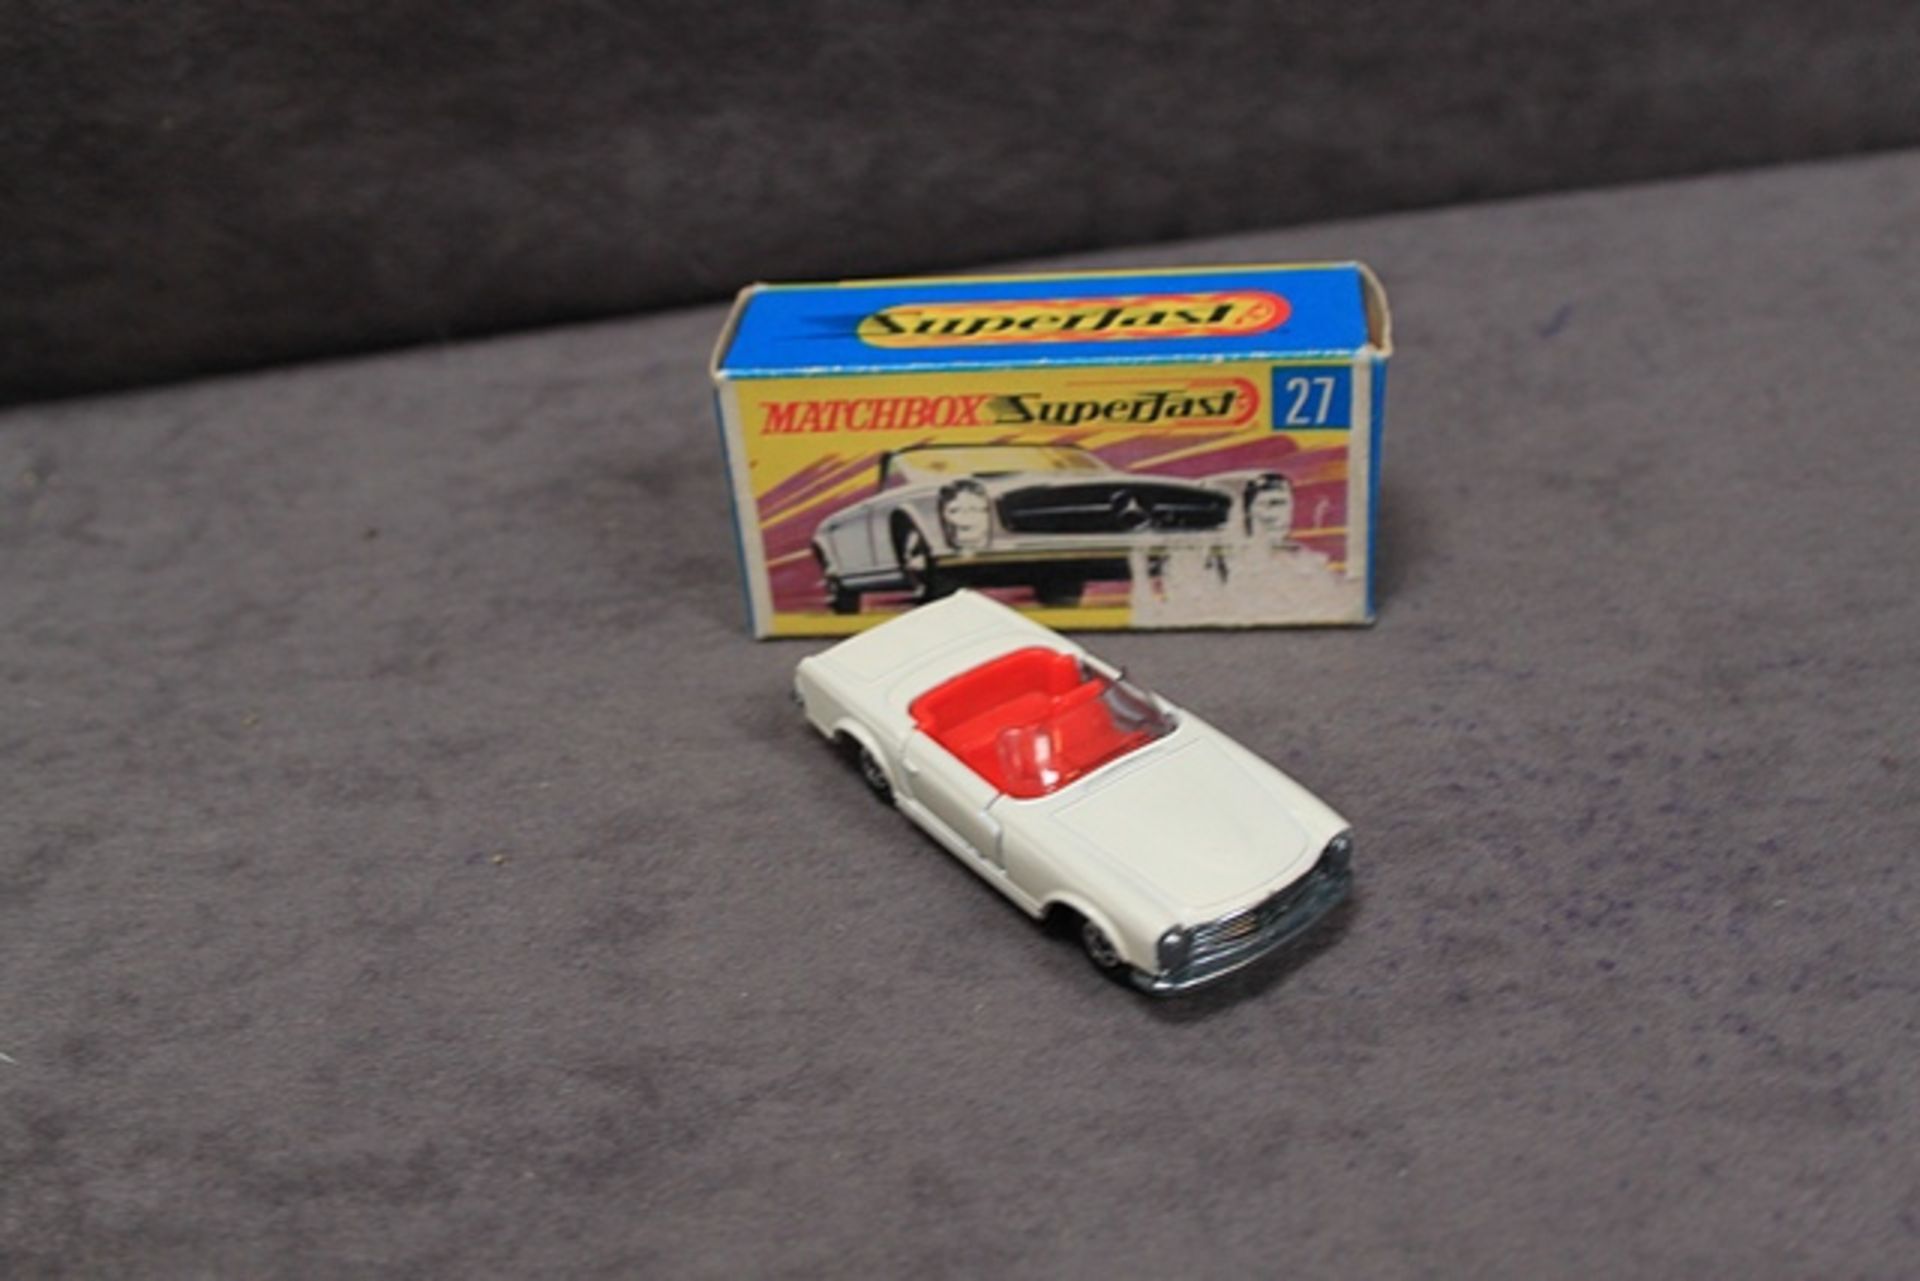 Mint Matchbox Superfast diecast #27 White body red interior and unpainted basein excellent box